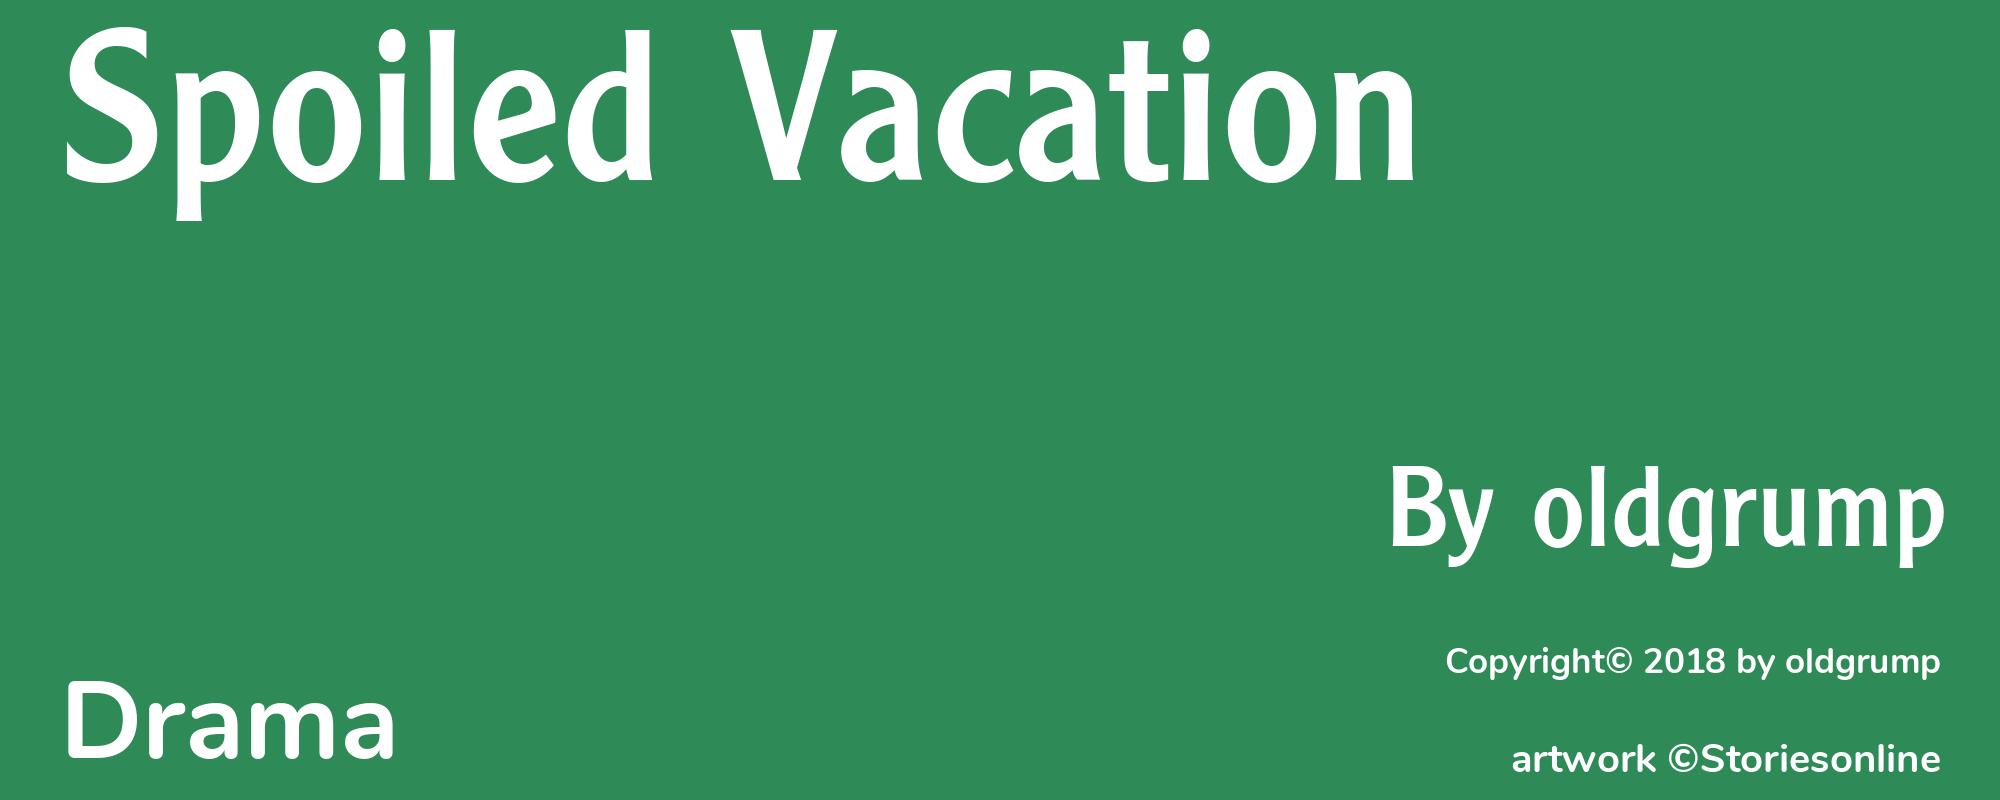 Spoiled Vacation - Cover